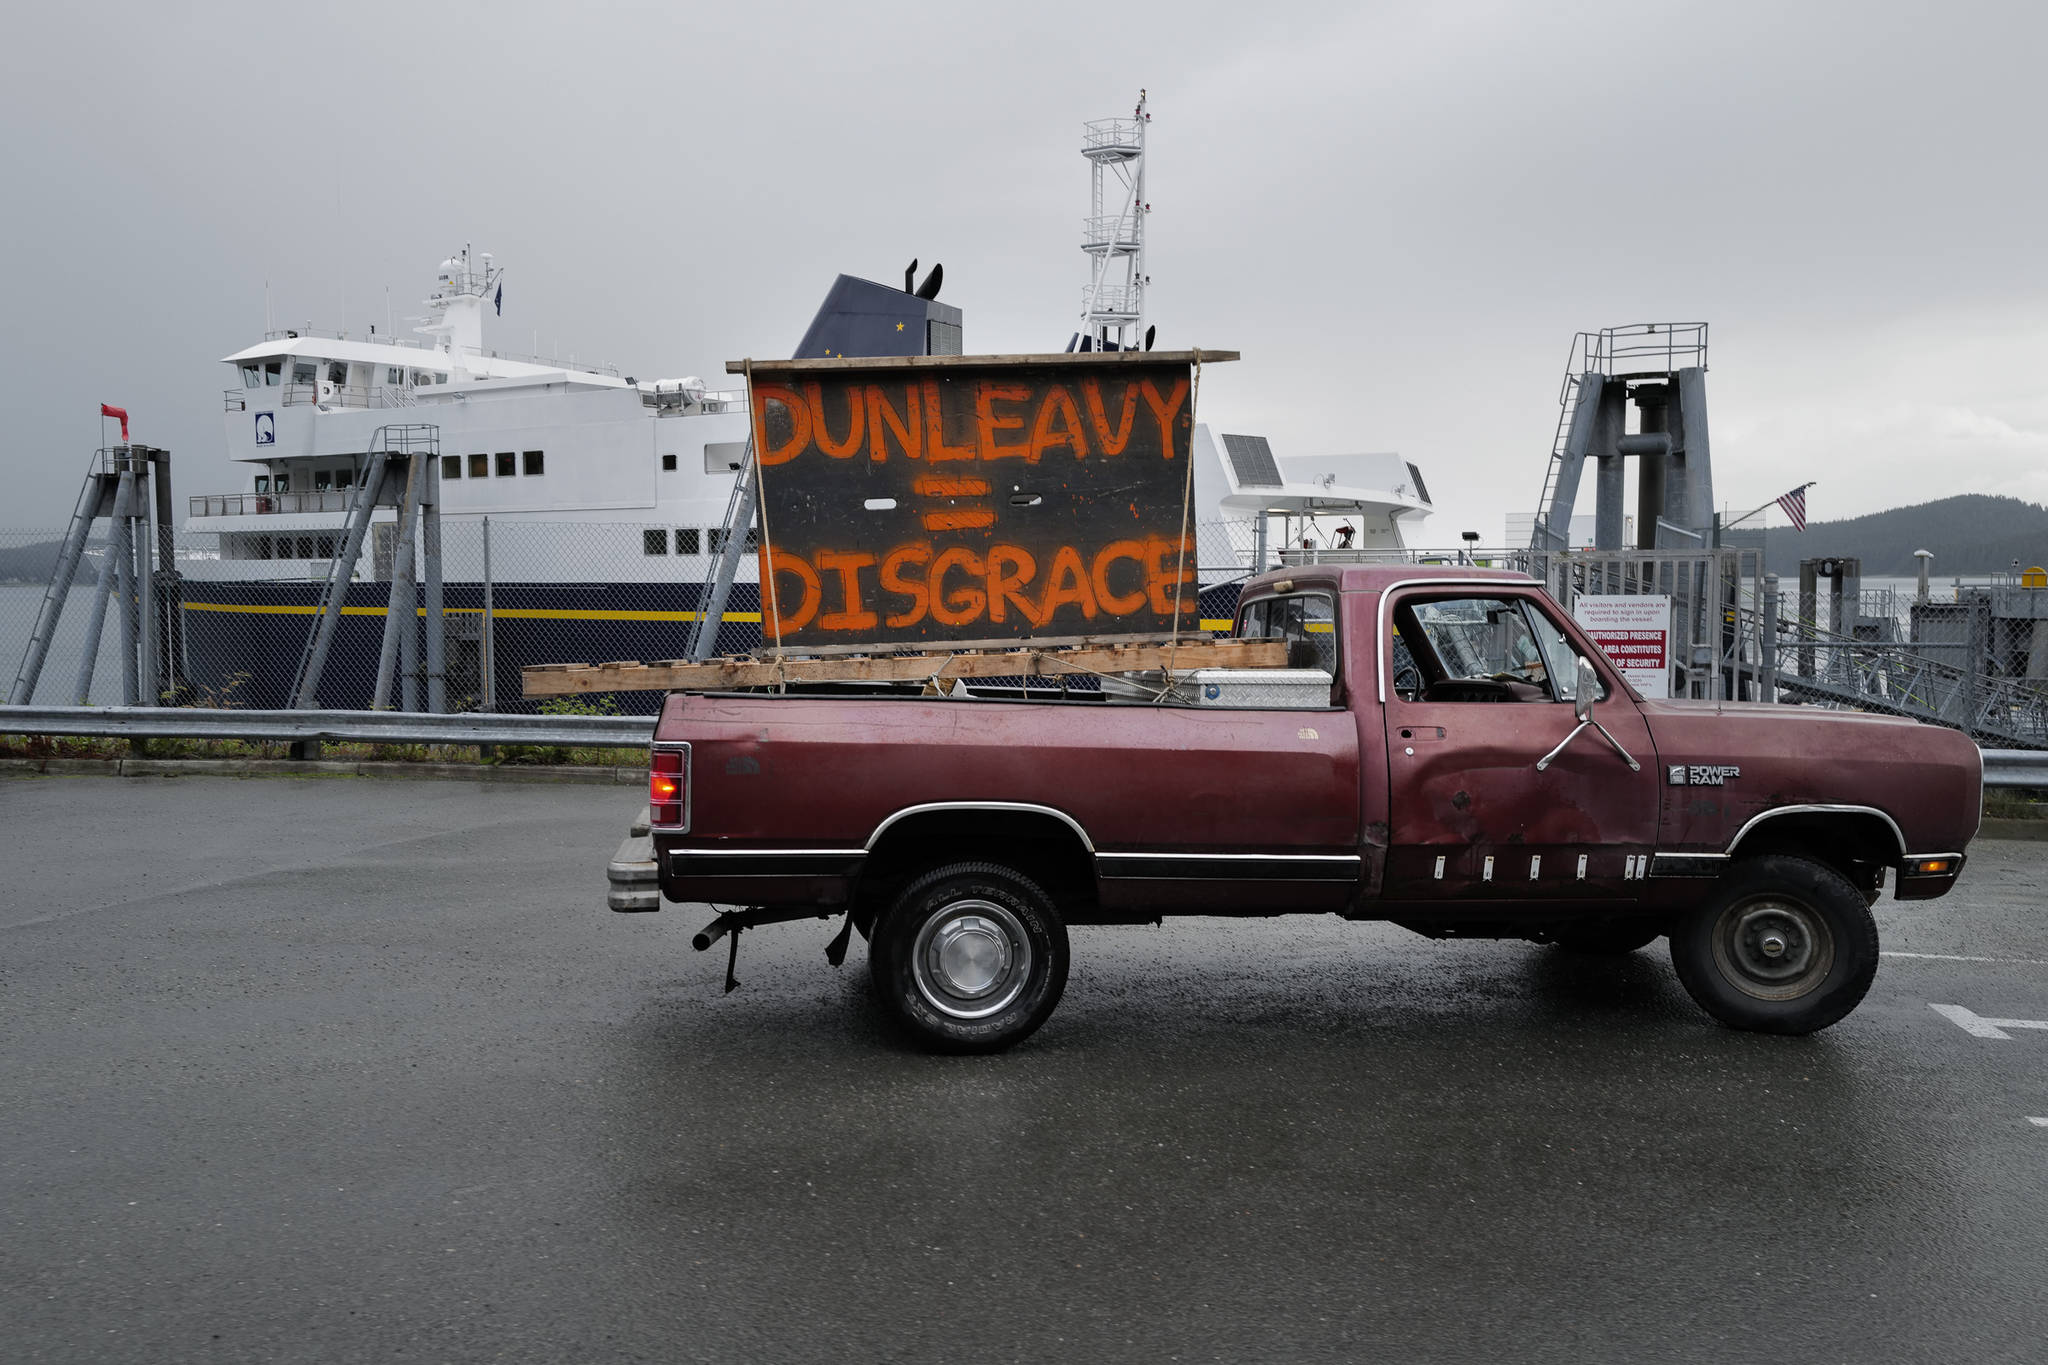 Mike Forrest displays his homemade sign at the Auke Bay Terminal after the Alaska Region of the Inland Boatman’s Union of the Pacific went on strike on Wednesday, July 24, 2019. (Michael Penn | Juneau Empire)